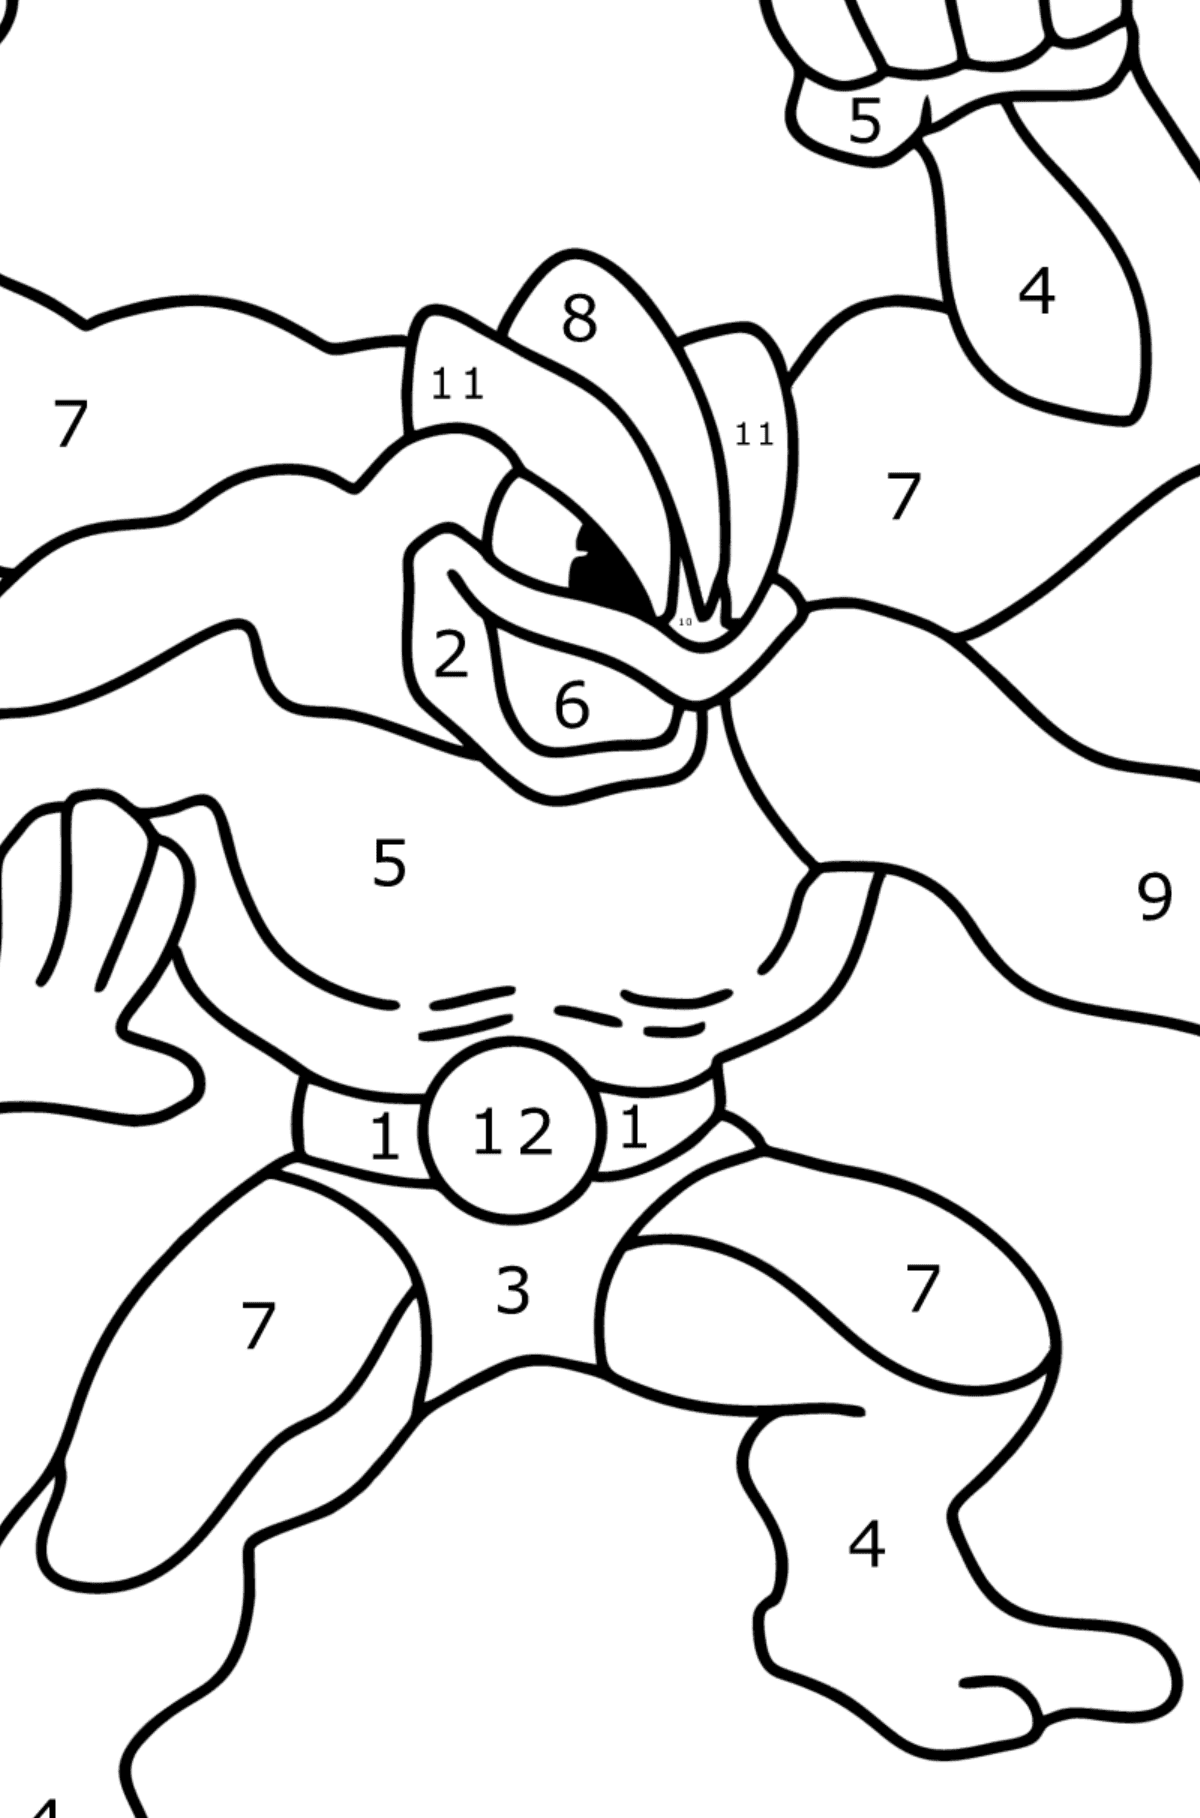 Coloring page Pokemon Go Machamp - Coloring by Numbers for Kids